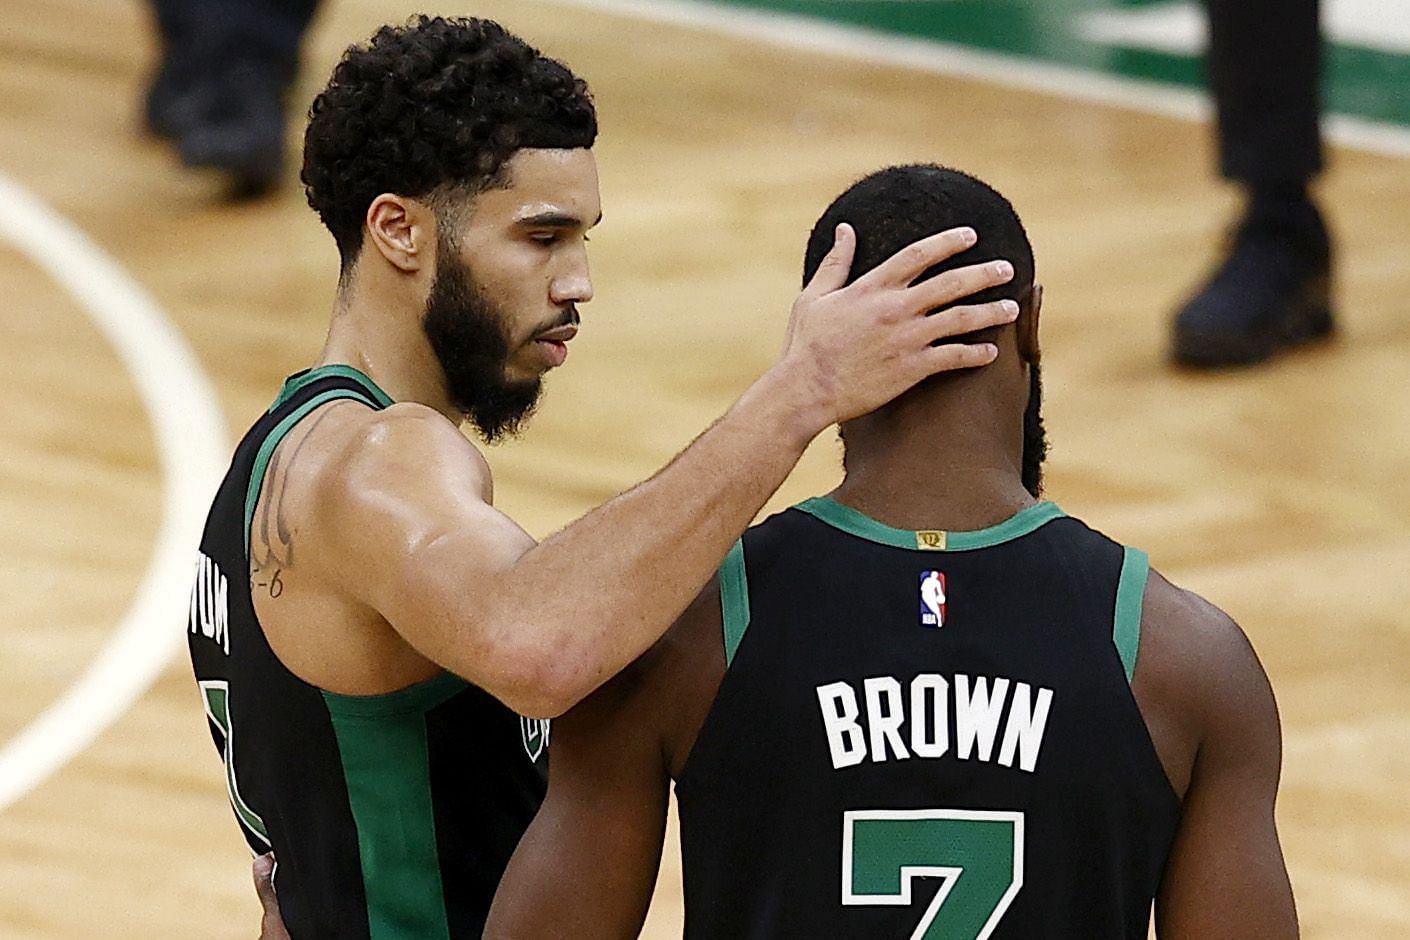 Jayson Tatum and Jaylen Brown combined for 57 points as the Boston Celtics beat the Philadelphia 76ers by 48 points on Tuesday